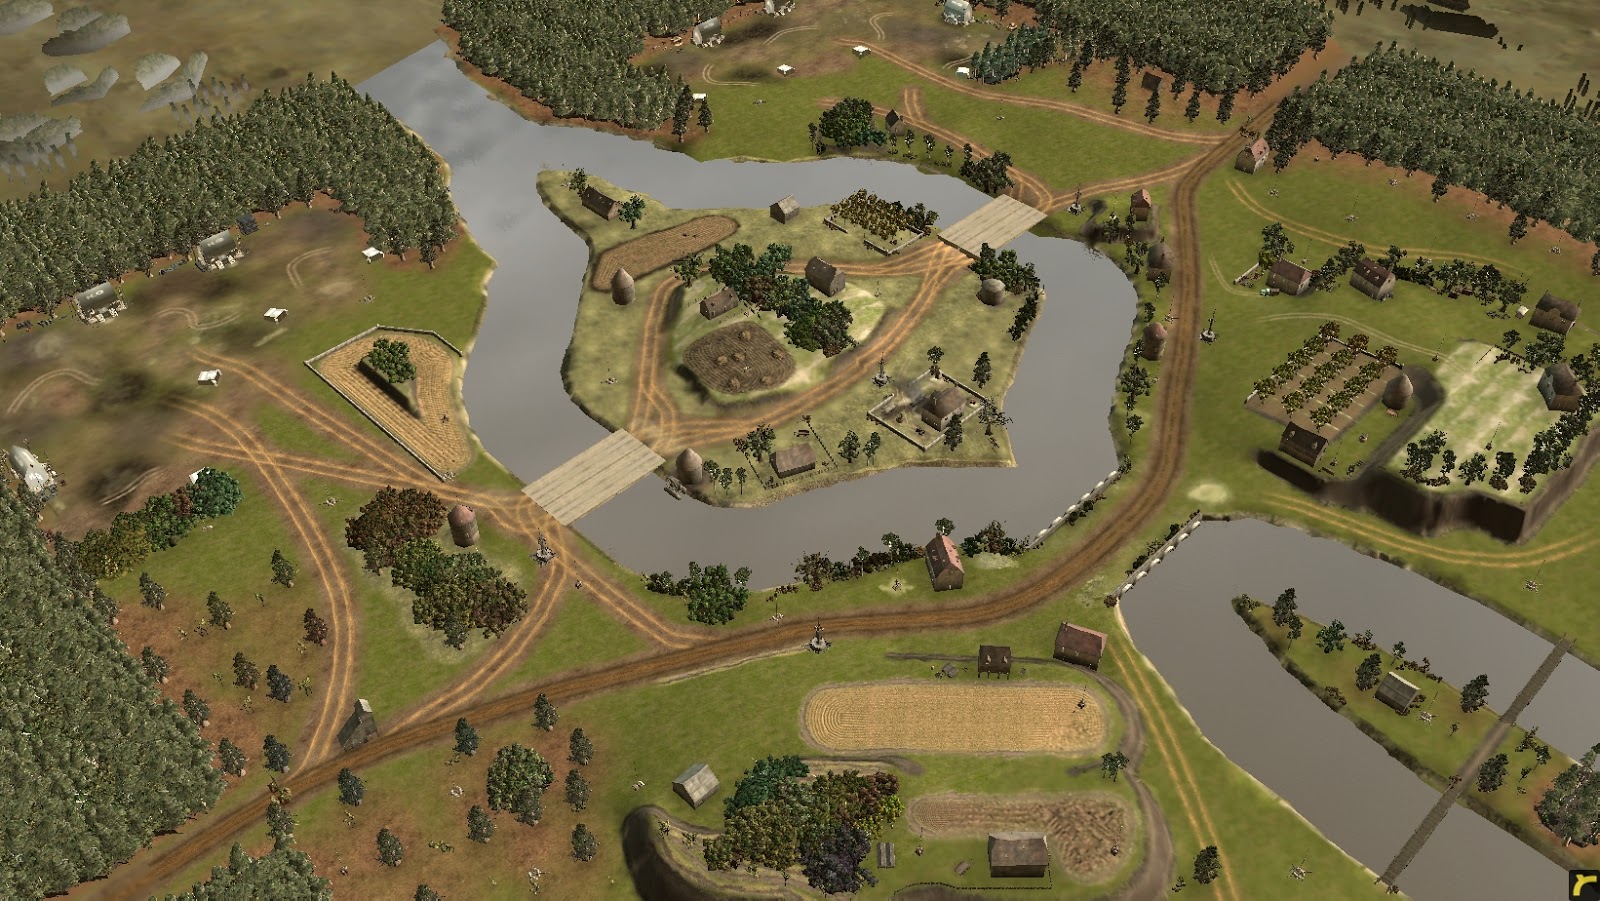 Company of heroes 2 maps